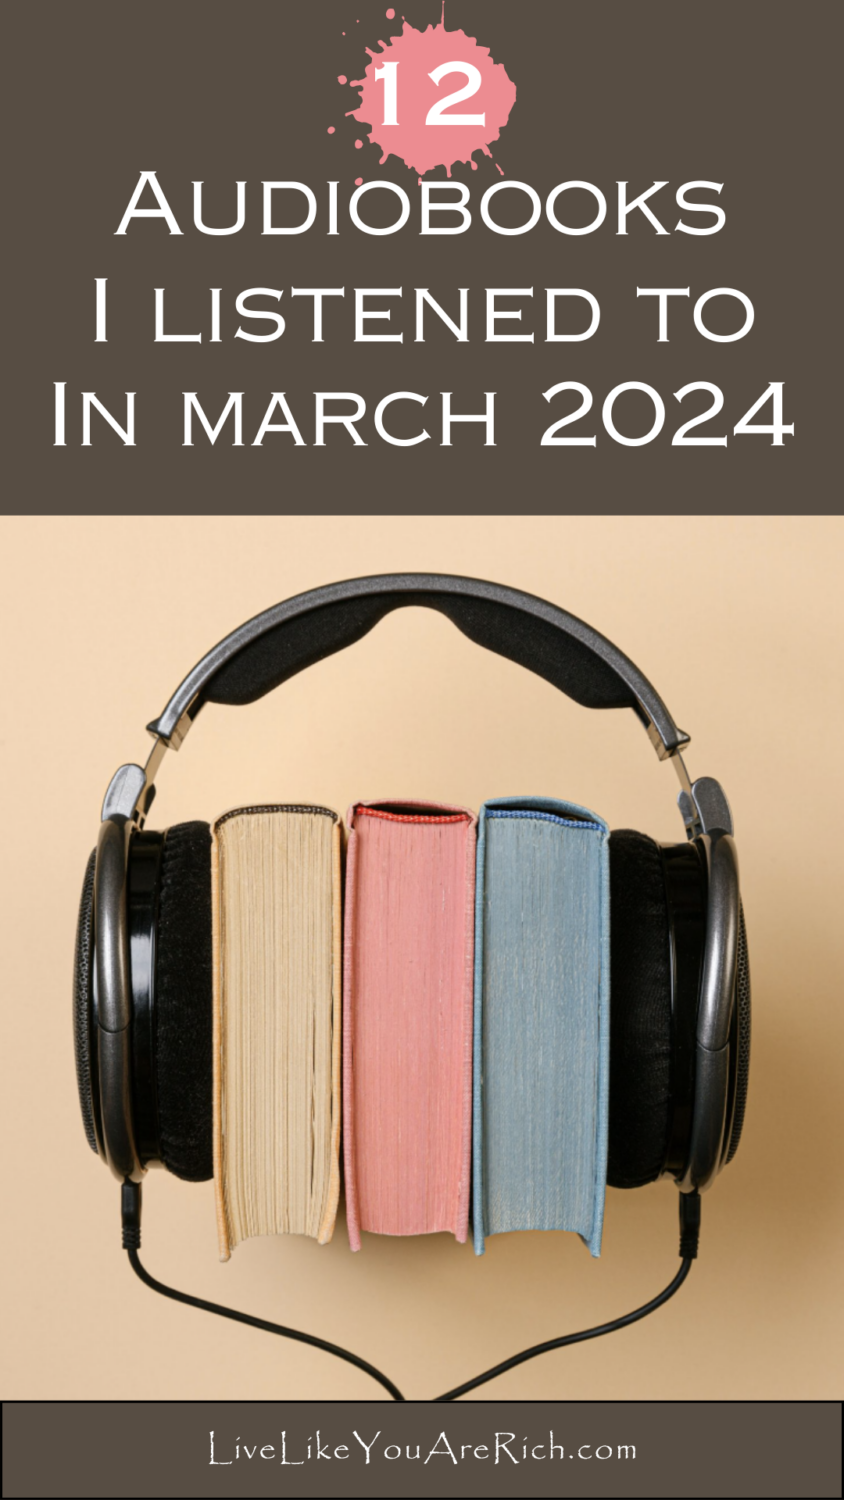 12 Audiobooks I Listened to in March 2024